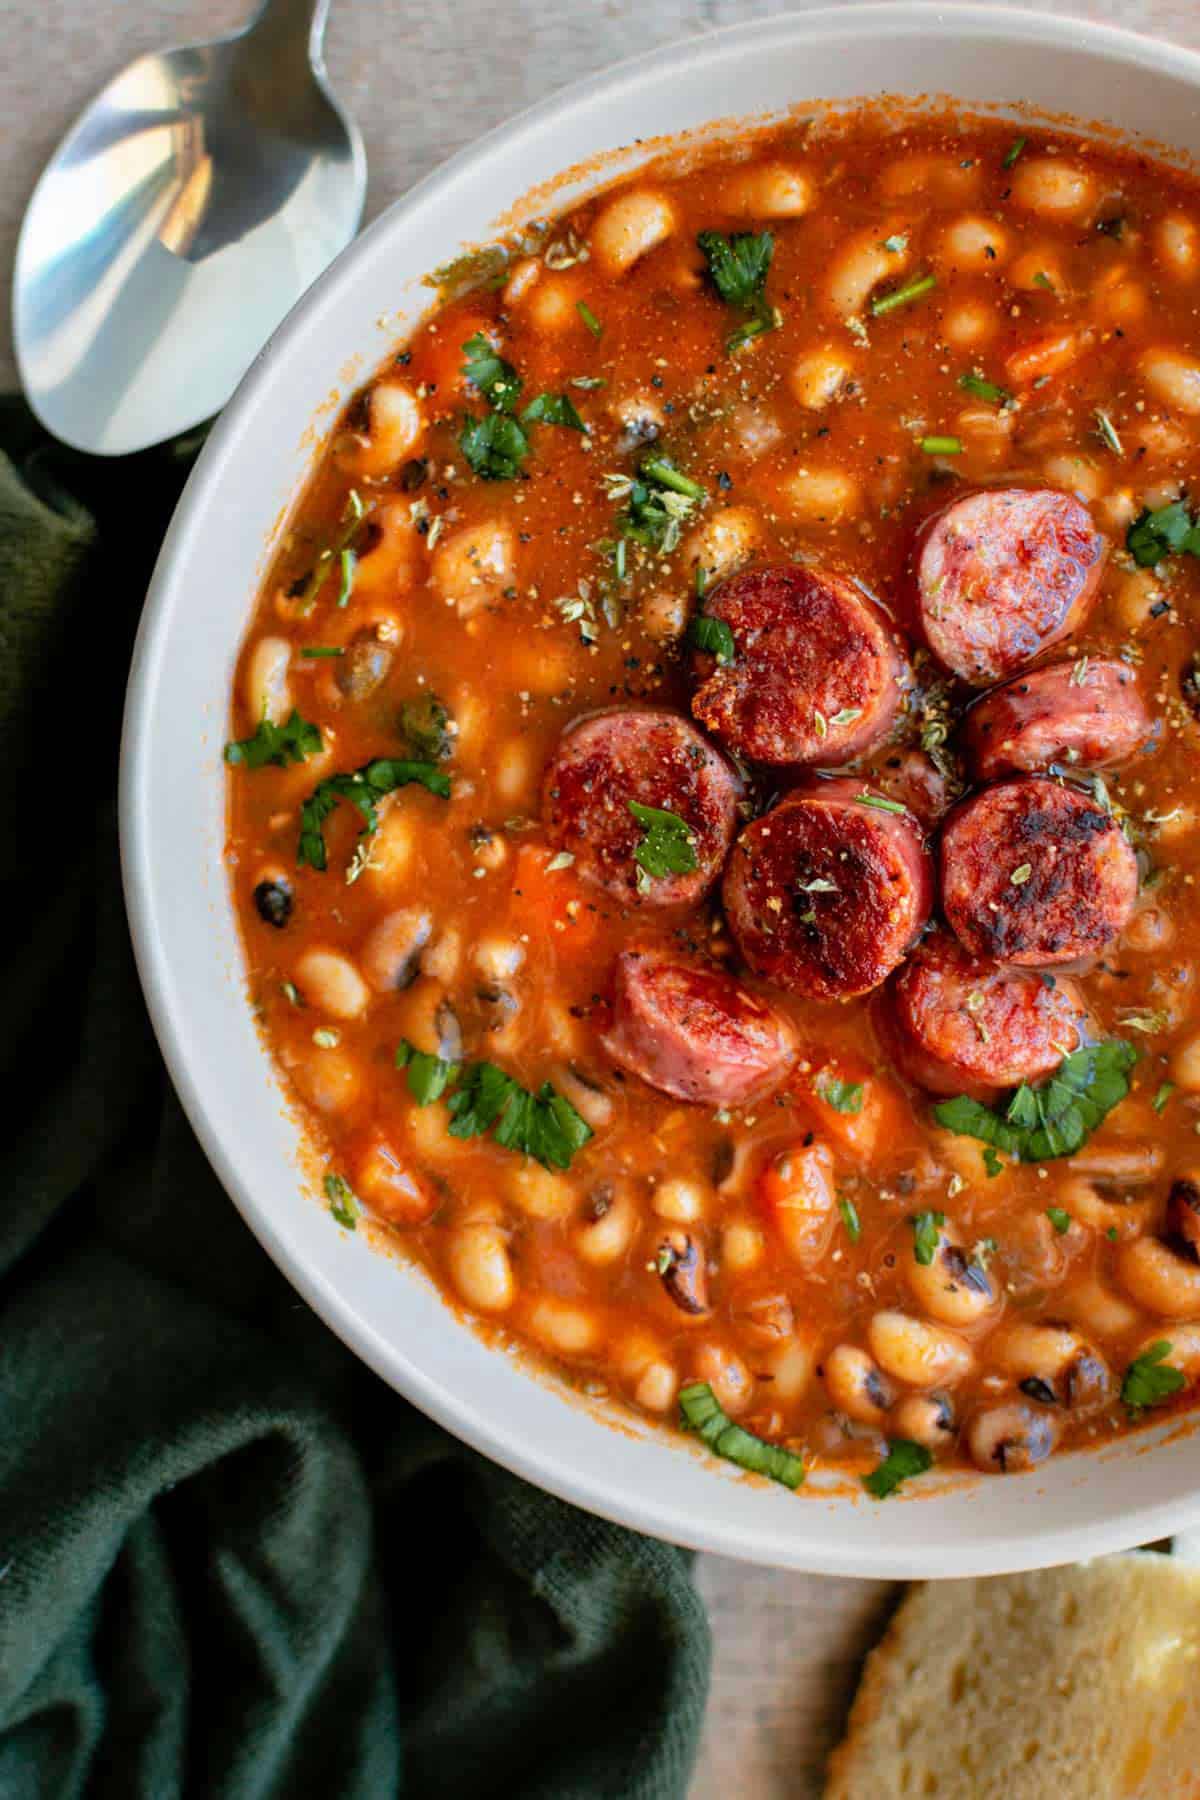 Black Eyed Peas Soup With Sausage